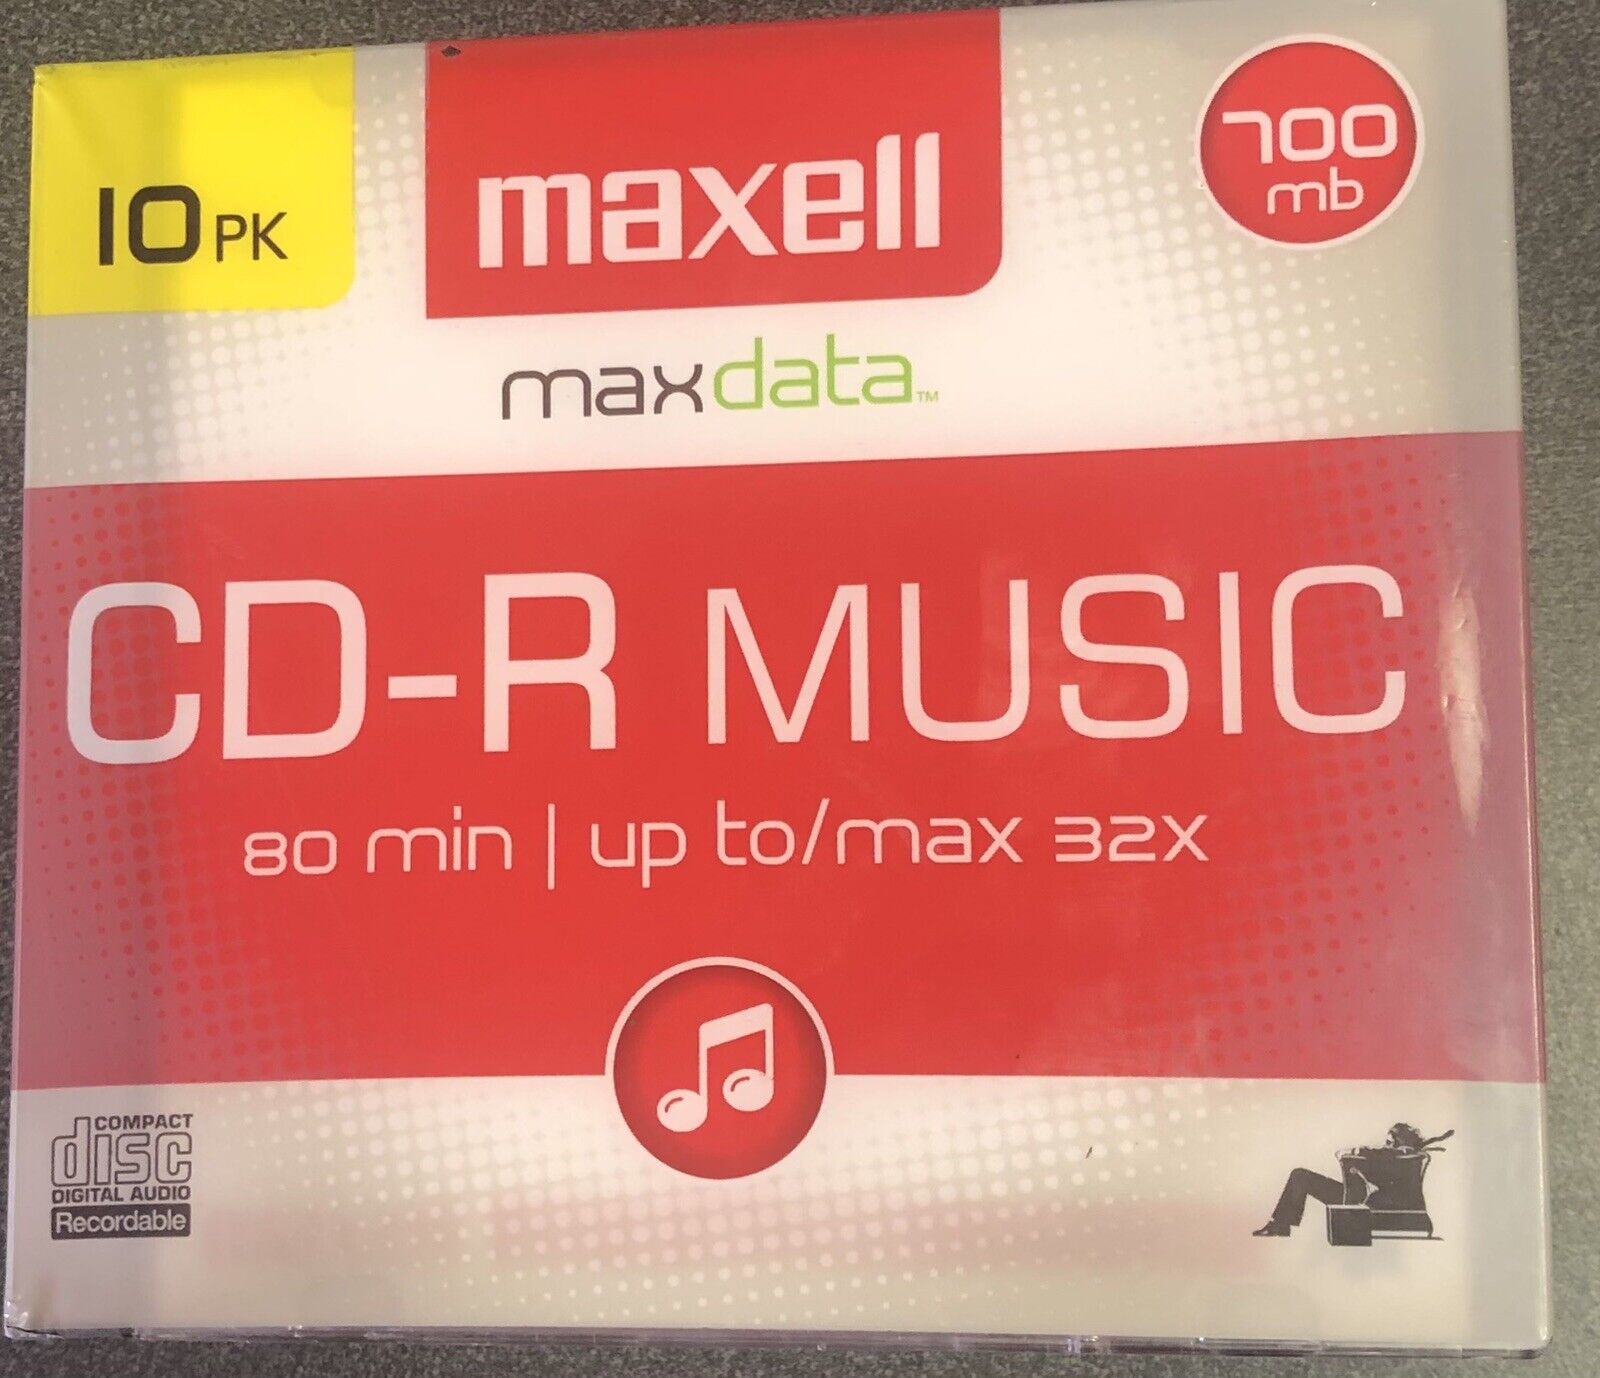 MAXELL 10 Pack CD-R Music 80 Minutes 700 MB 32X Compact Disc DIGITAL NEW SEALED